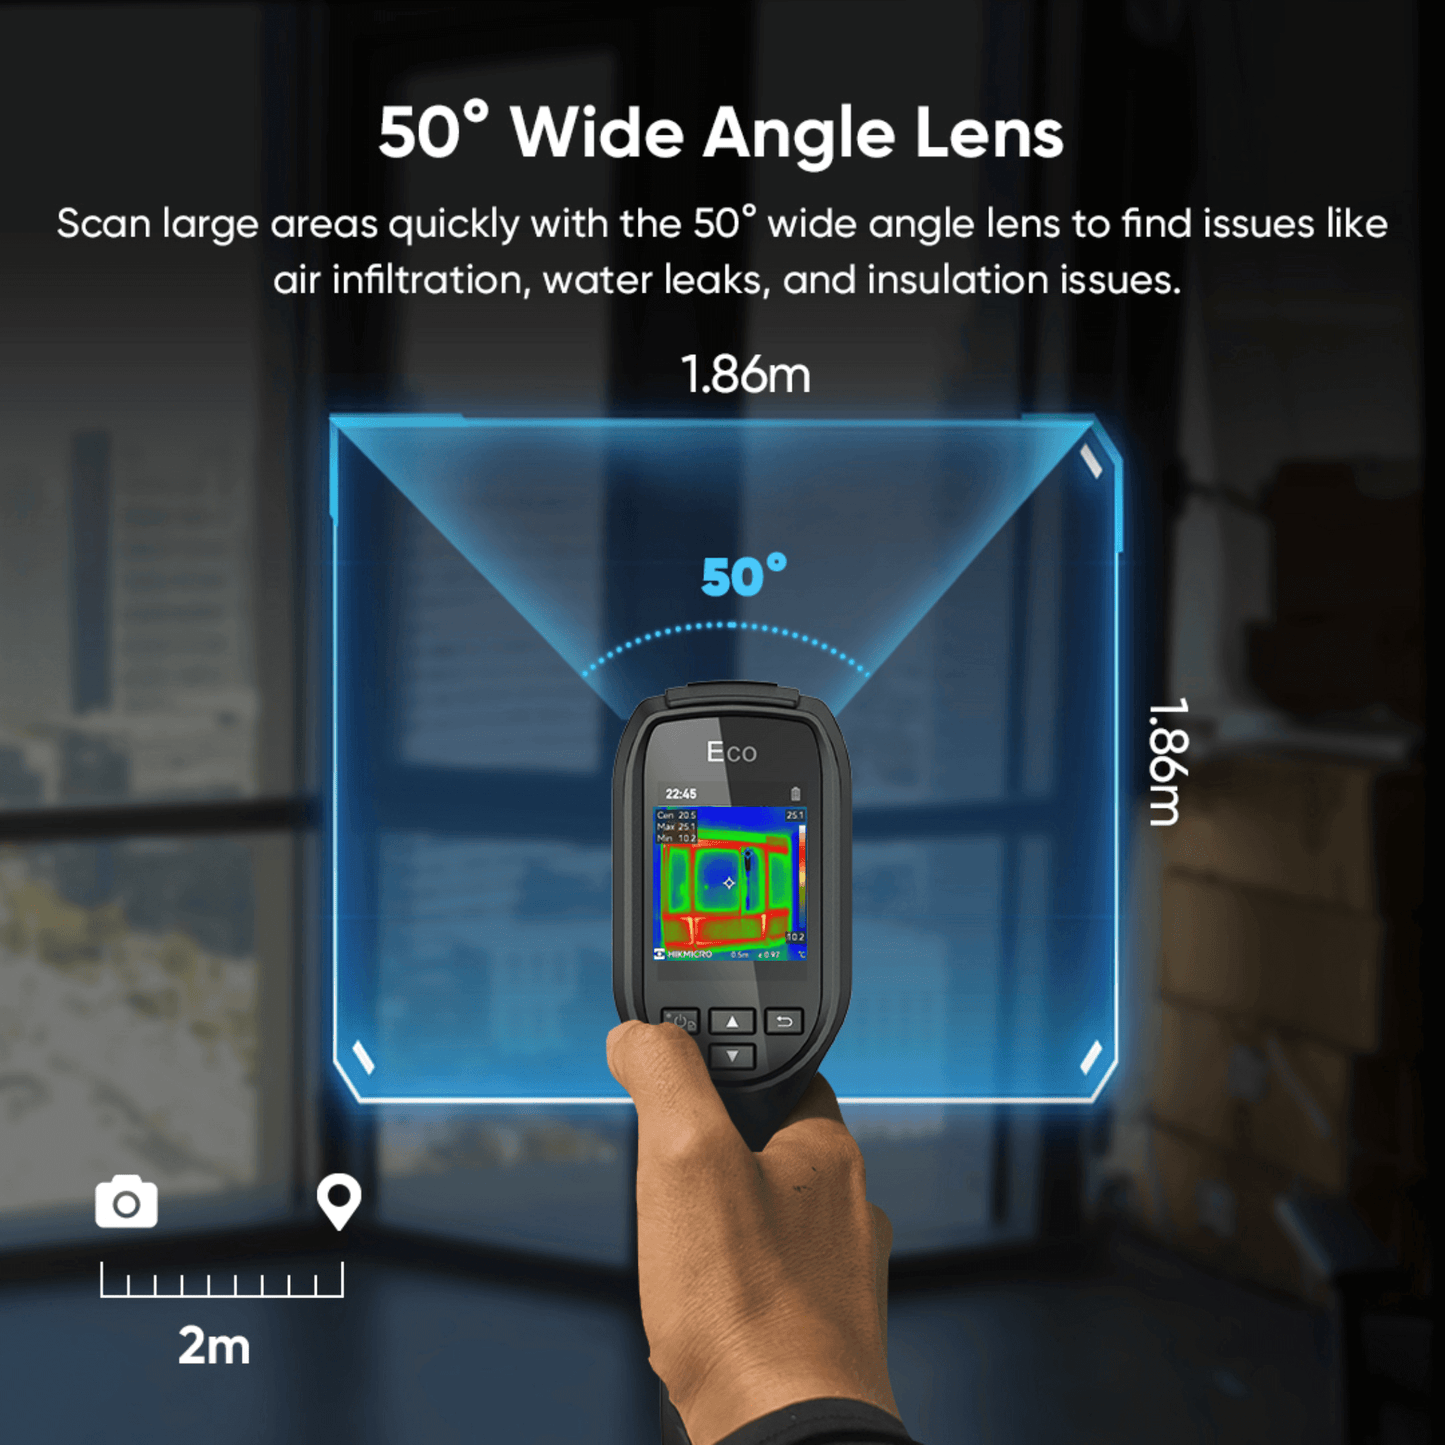 Scan larger areas quickly with the Bi-Spectrum HikMicro Eco-V Handheld Thermal Imager 